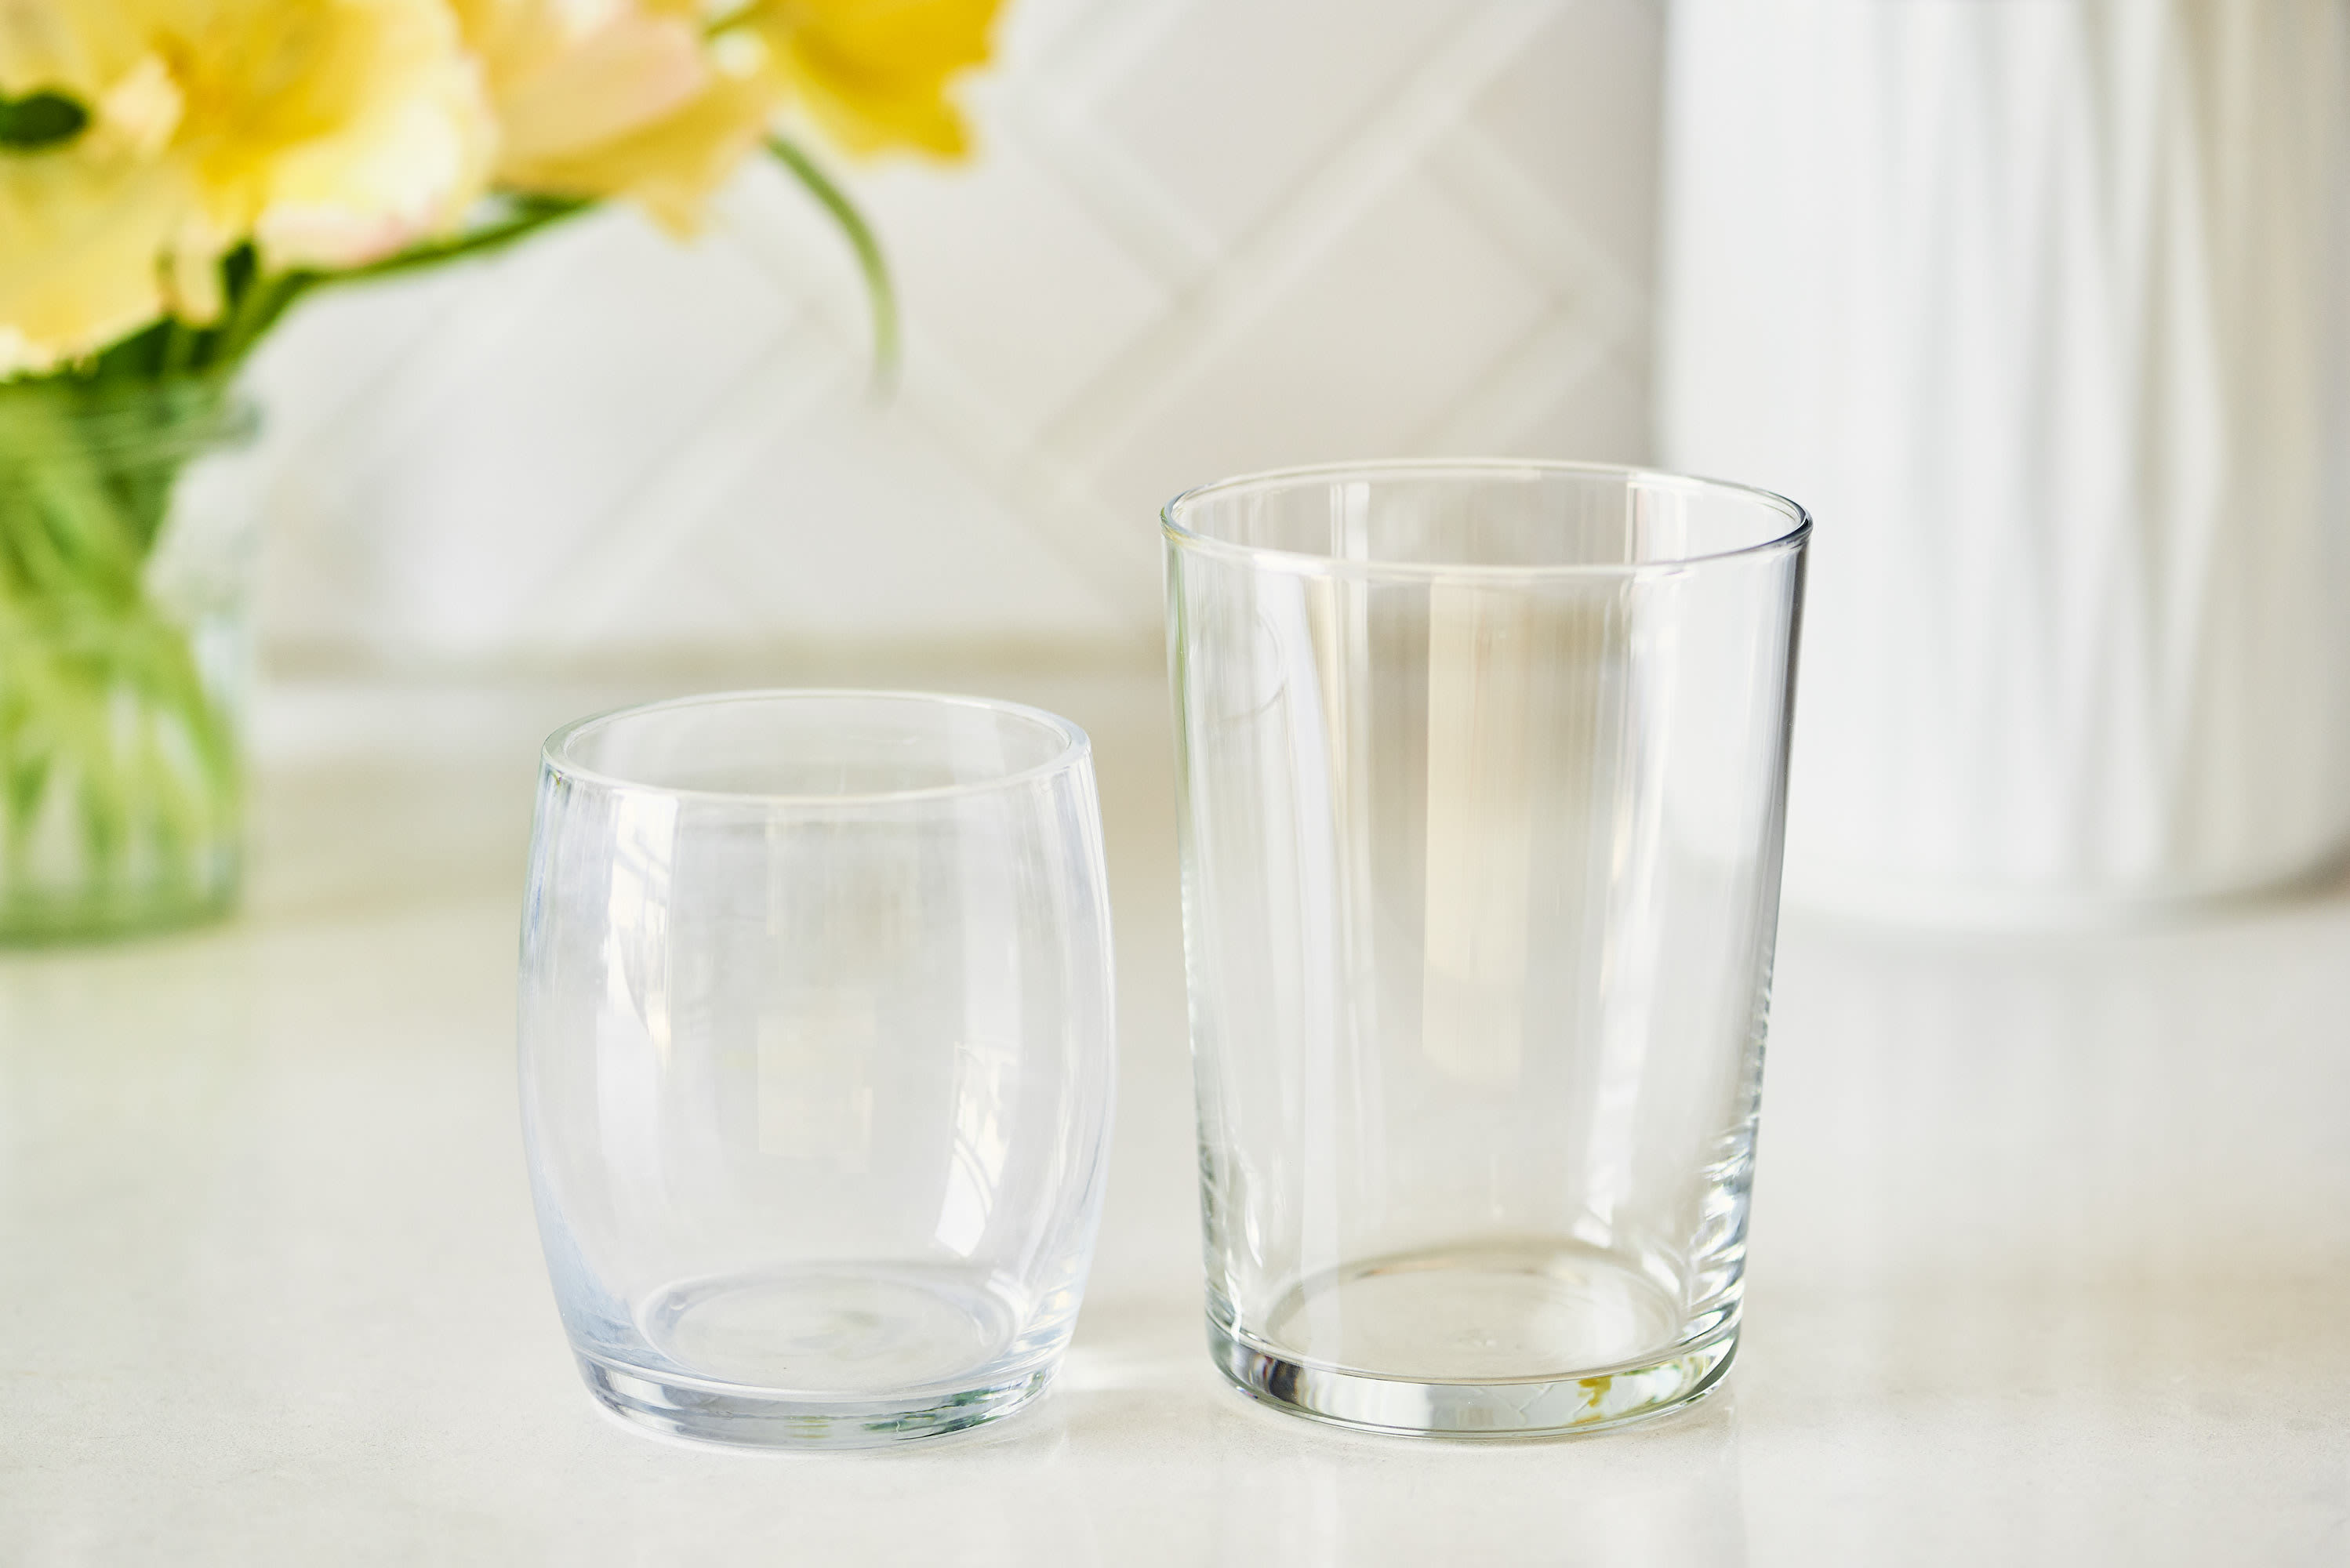 How to Clean Cloudy Drinking Glasses